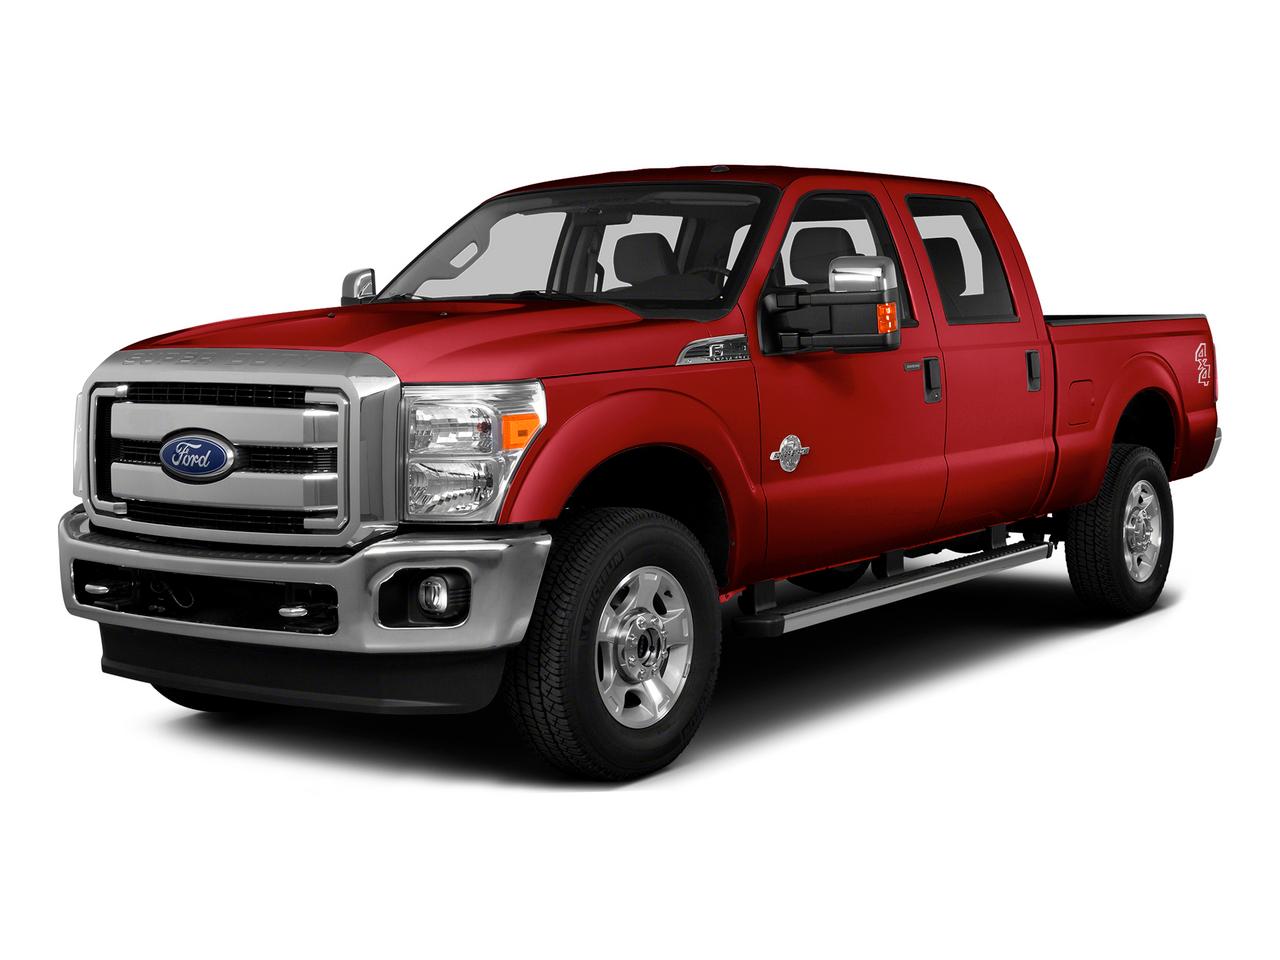 2015 Ford Super Duty F-350 SRW Vehicle Photo in Weatherford, TX 76087